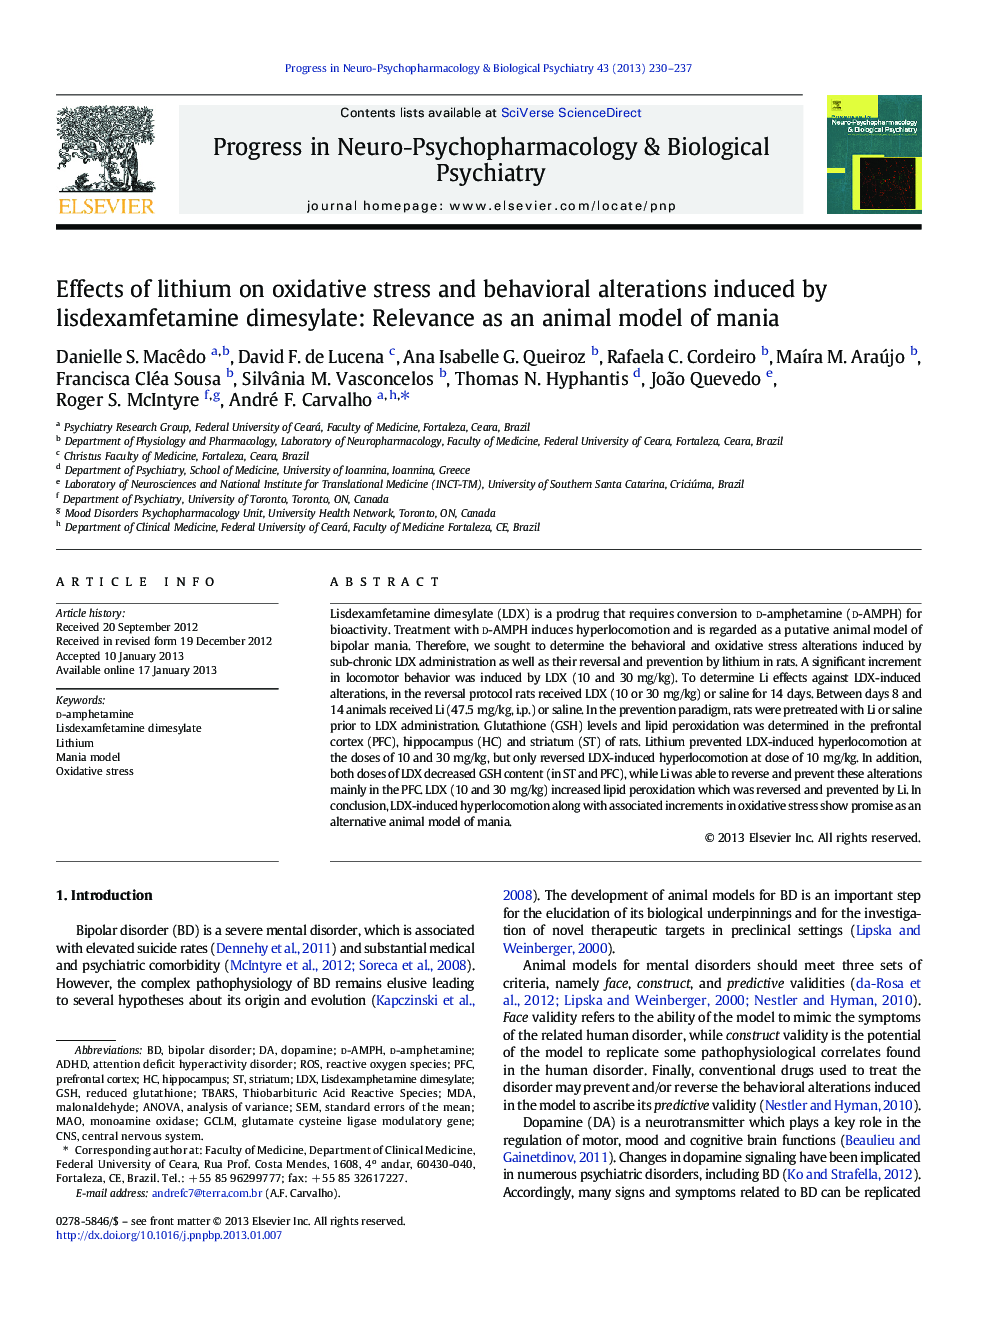 Effects of lithium on oxidative stress and behavioral alterations induced by lisdexamfetamine dimesylate: Relevance as an animal model of mania